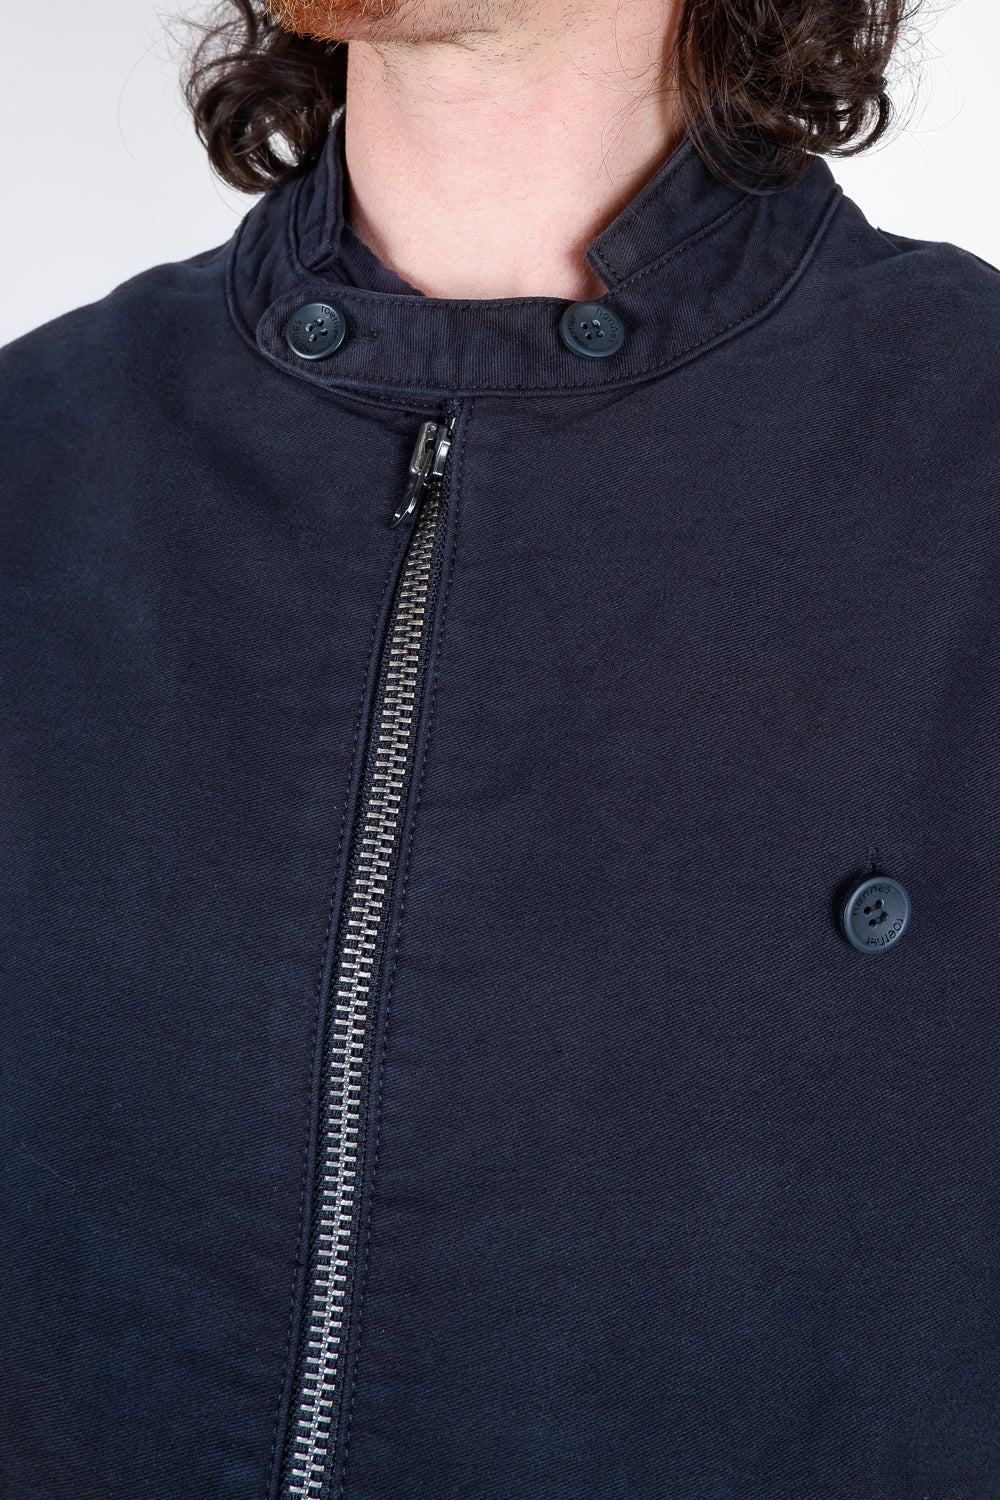 Buy the Hannes Roether Heavy Cotton Zip-Up Jacket Navy at Intro. Spend £50 for free UK delivery. Official stockists. We ship worldwide.